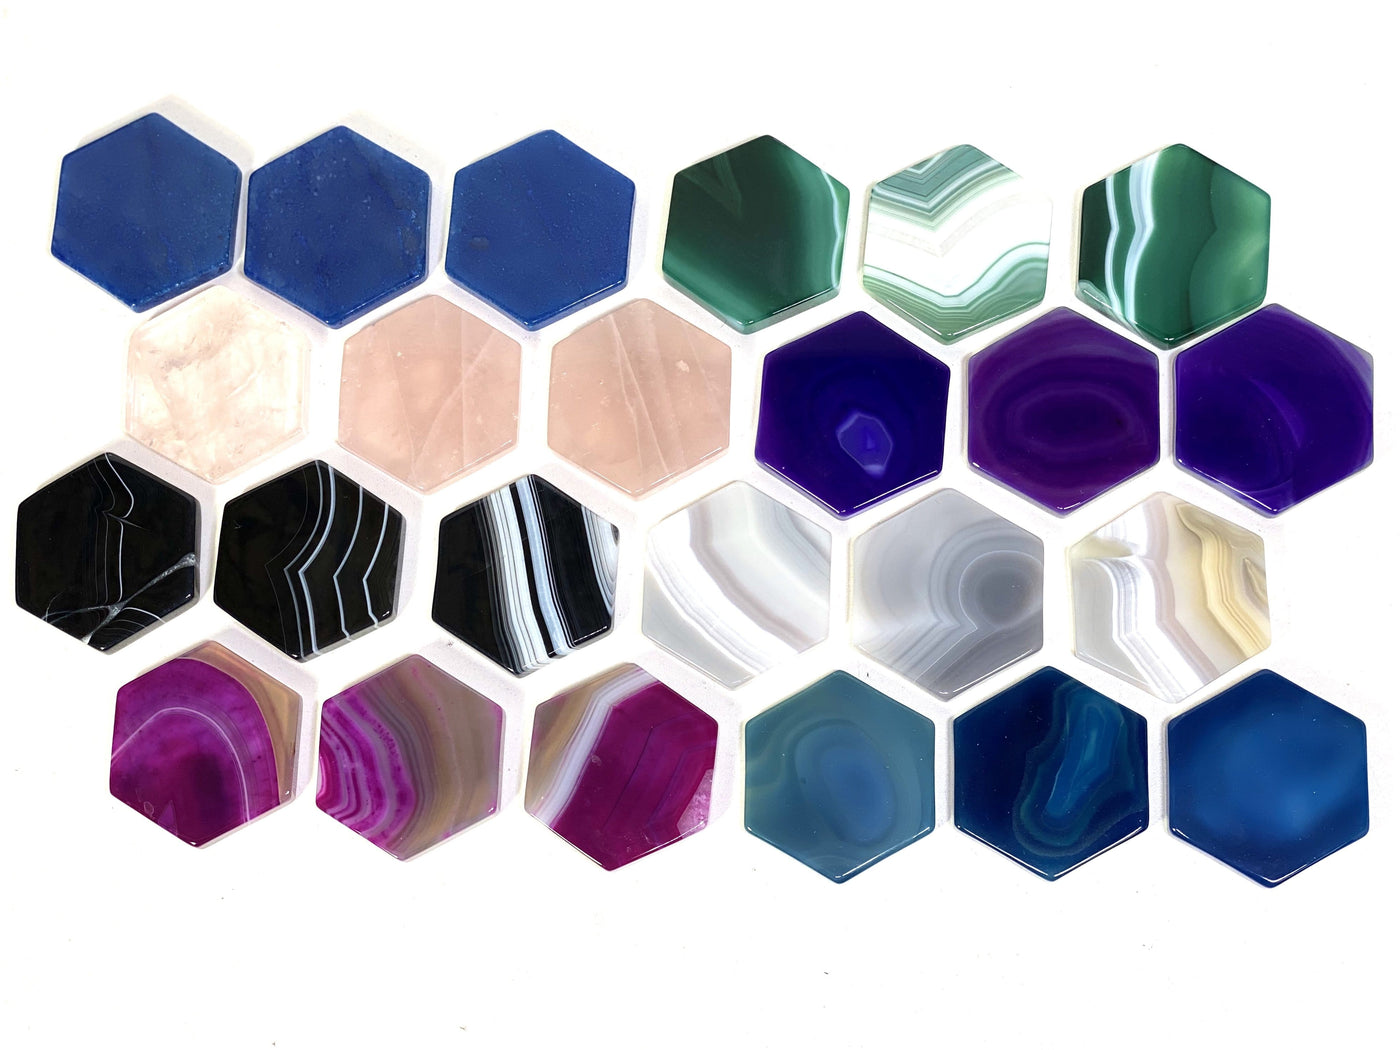 agate hexagons displayed to show color and pattern variations in  Purple Agate Blue Agate Black Agate Gray Agate Pink Agate Green Agate Rose Quartz Blue Quartz Quantity